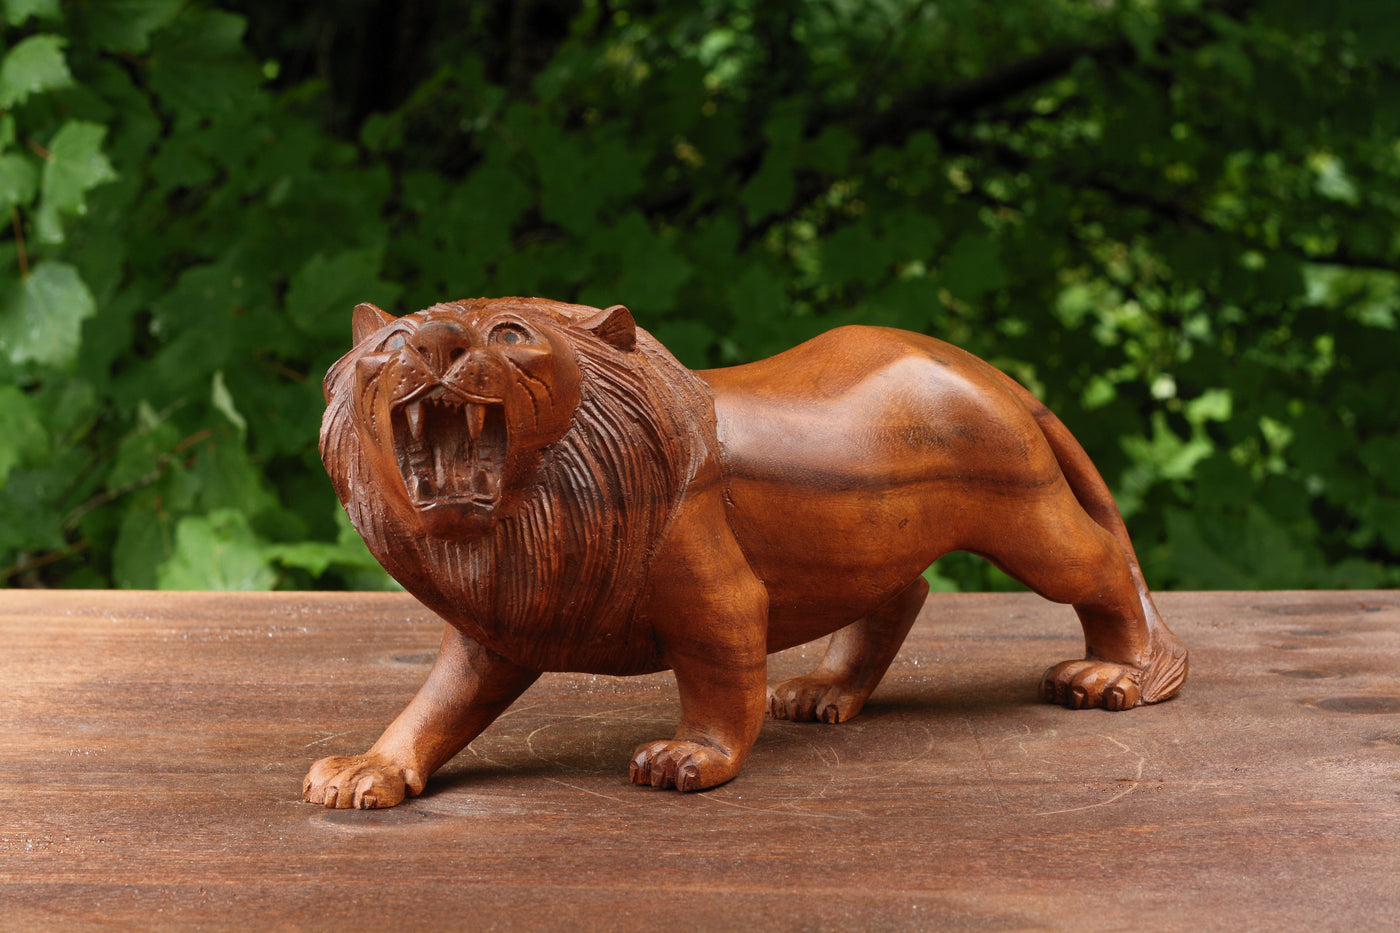 12" Wooden Hand Carved Lion Statue Figurine Sculpture Art Decorative Home Decor Accent Rustic Lodge Handmade Handcrafted Decoration